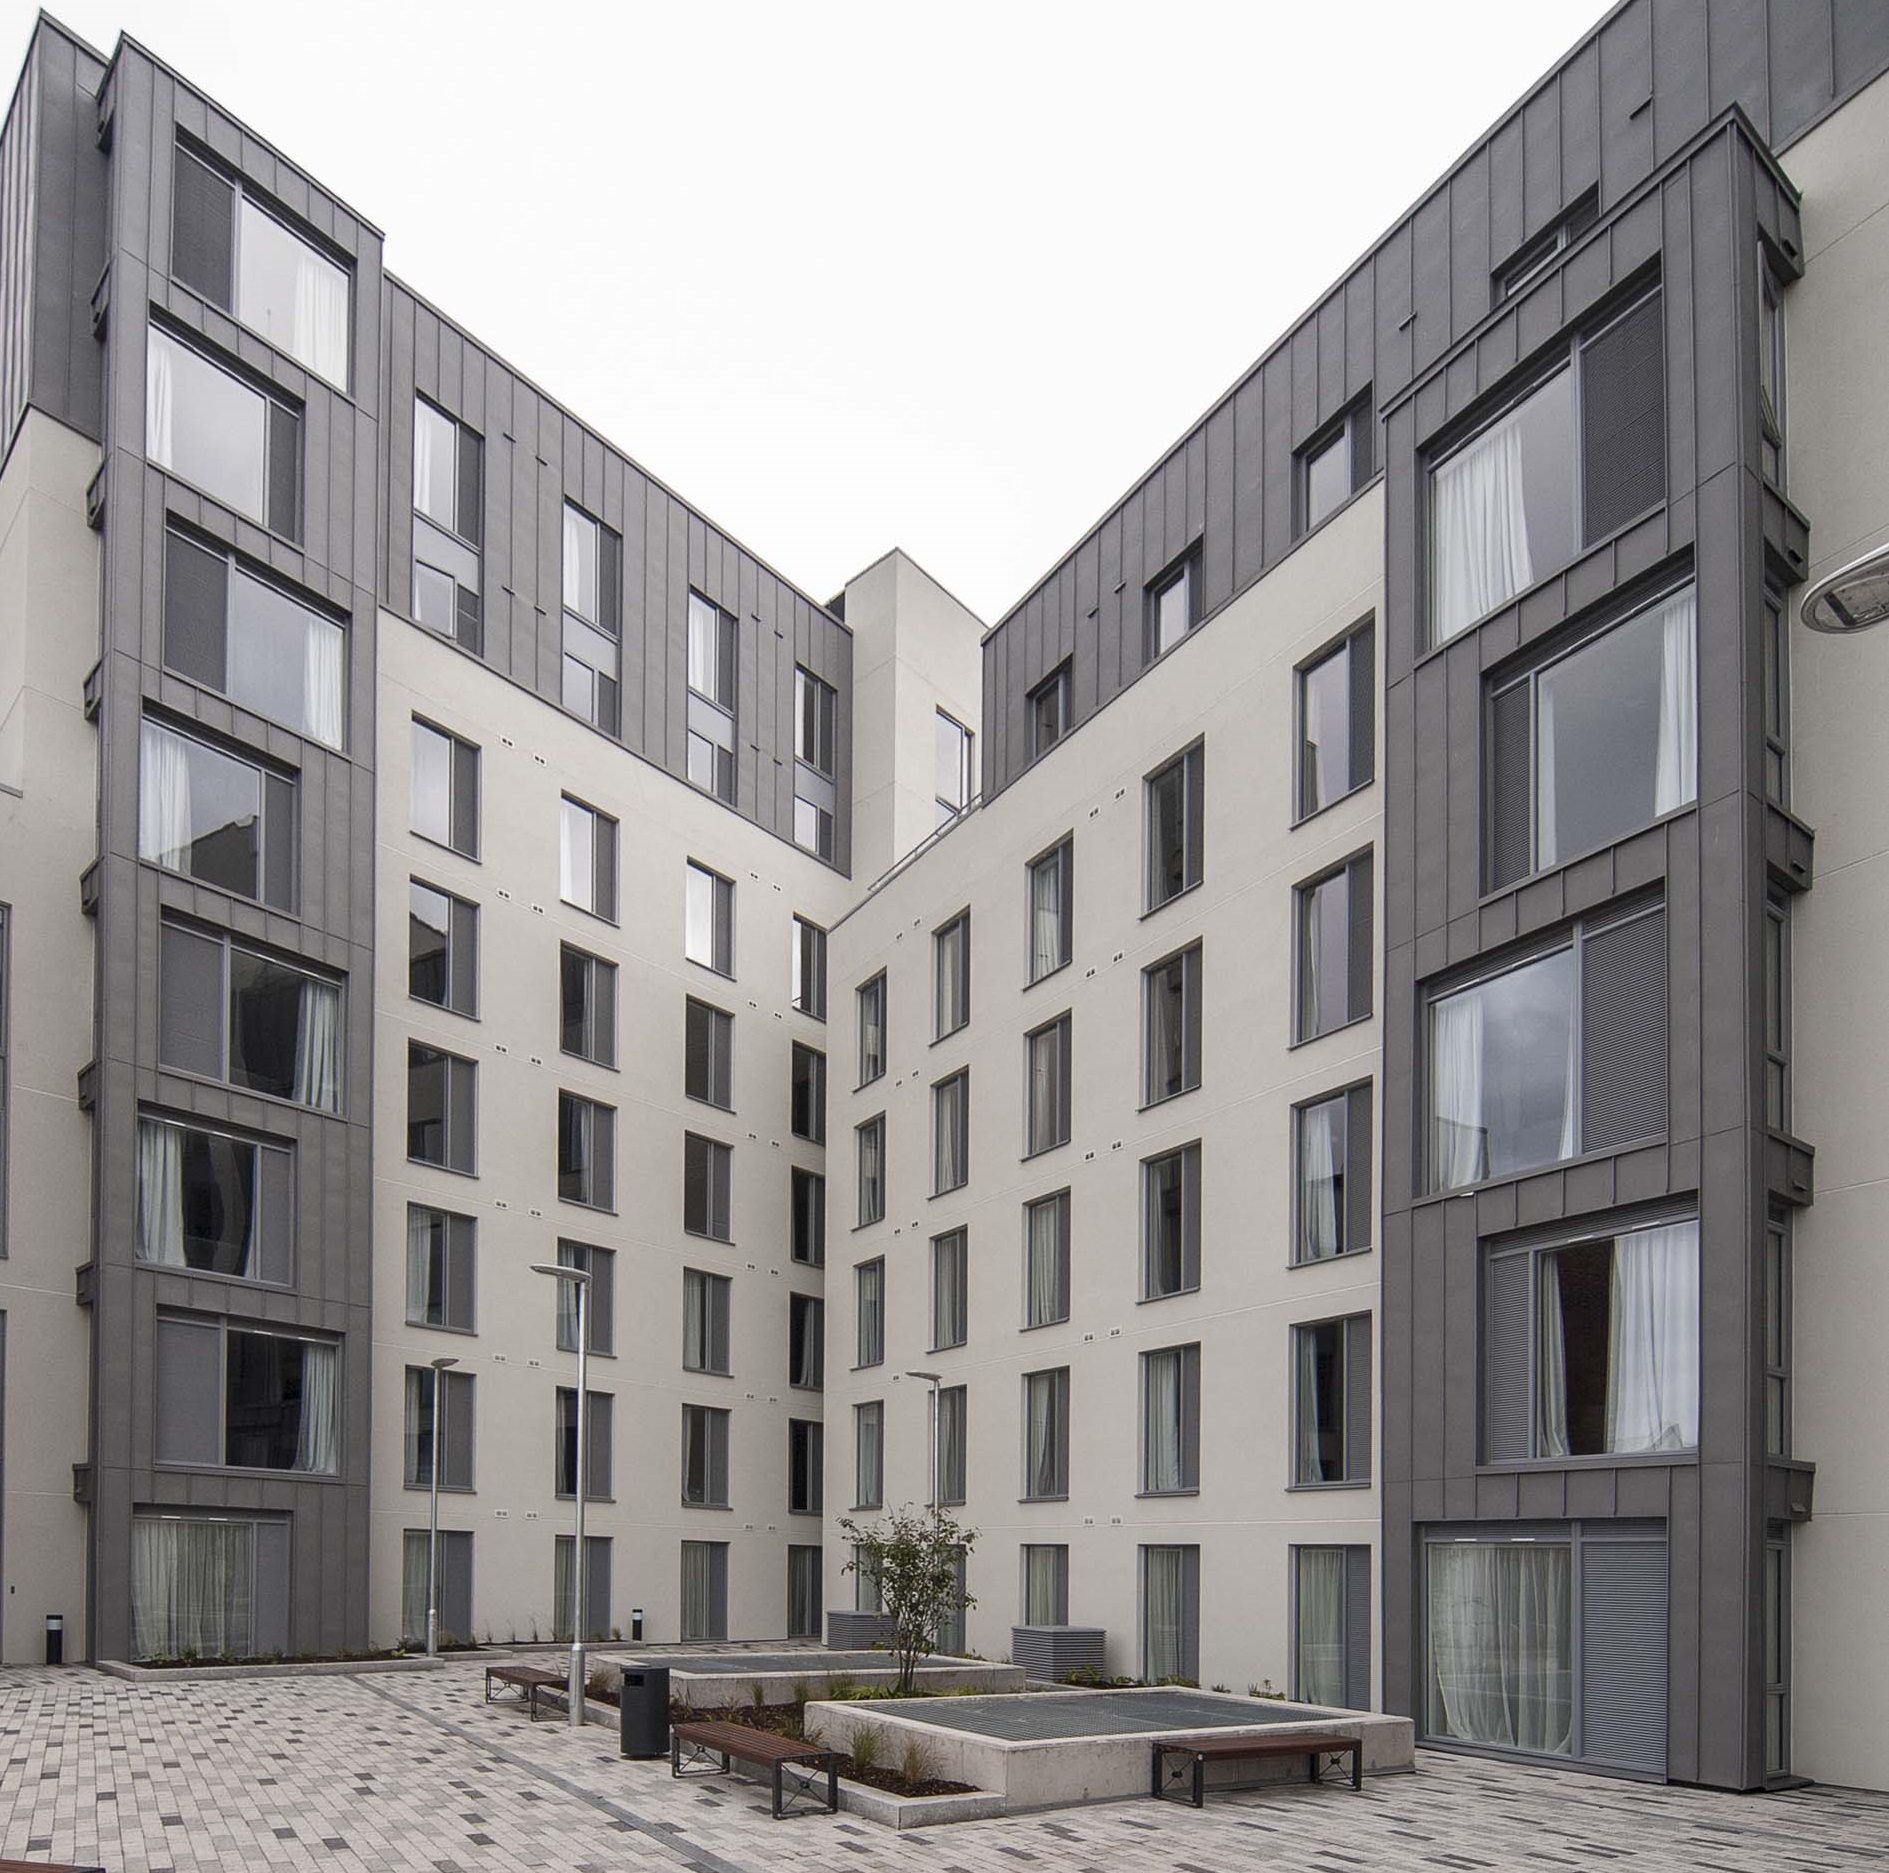 Dublin student accommodation features Weber EWI